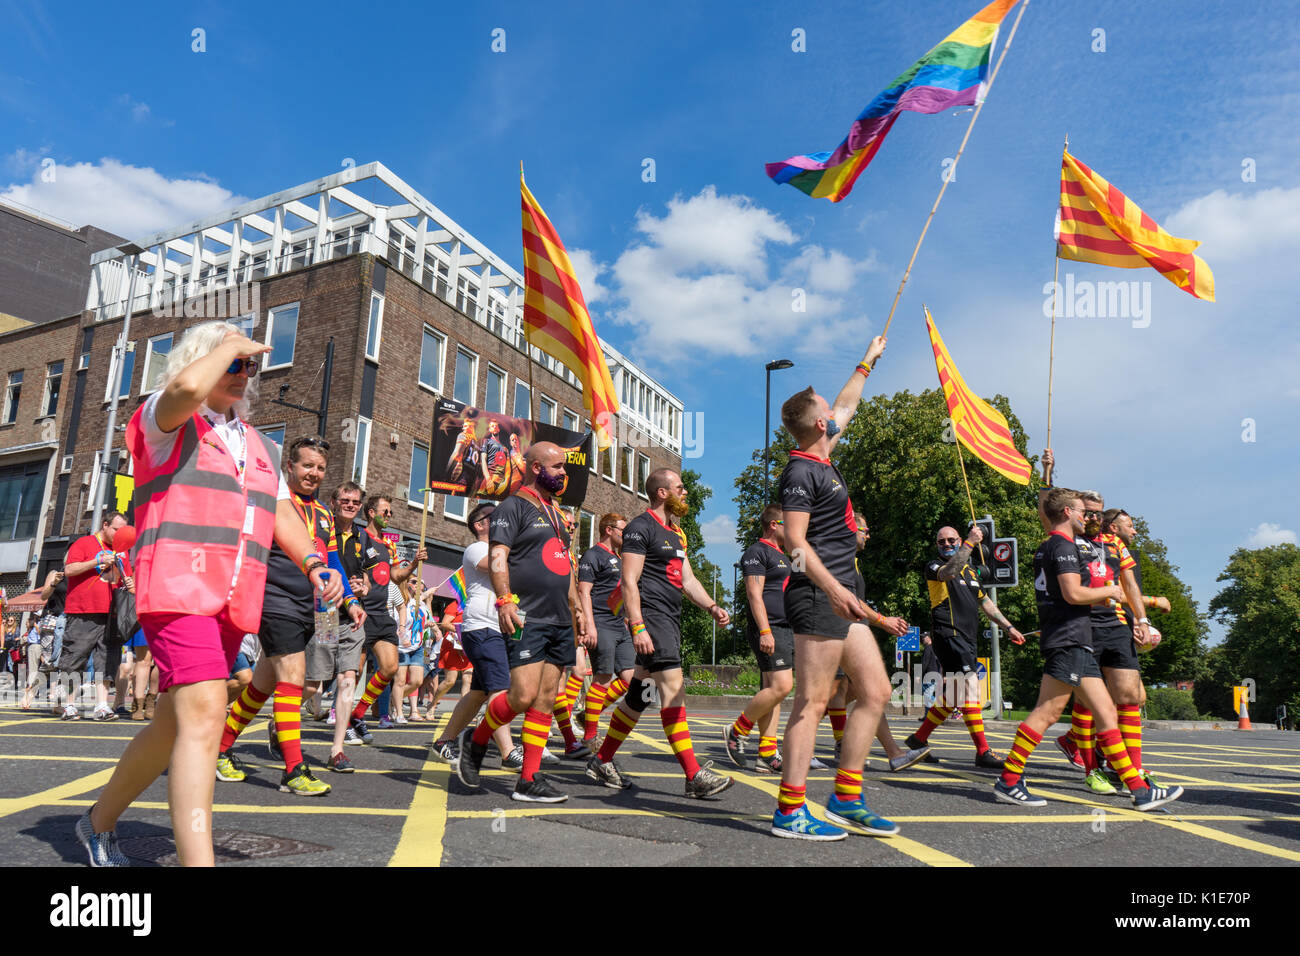 Southampton, UK. 26th of August 2017. People taking to the streets of Southampton to participate in a very colourful parade at the Annual Southampton Pride Festival 2017. This is the second year of the festival taking place. Stock Photo